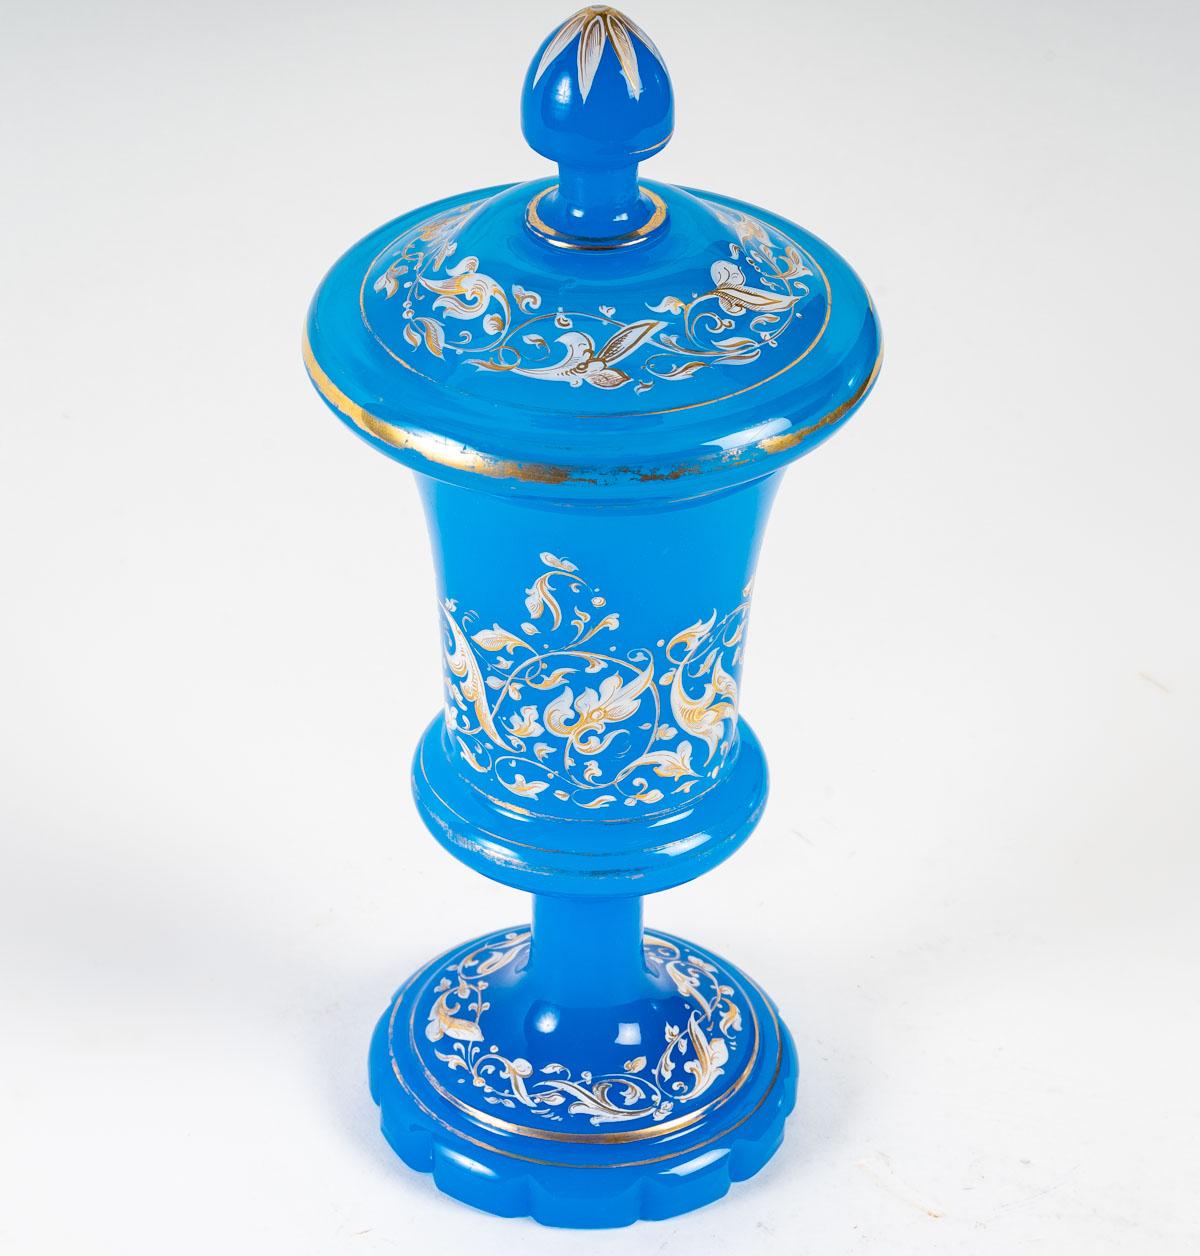 Napoleon III Blue opaline goblet and lid, 19th century